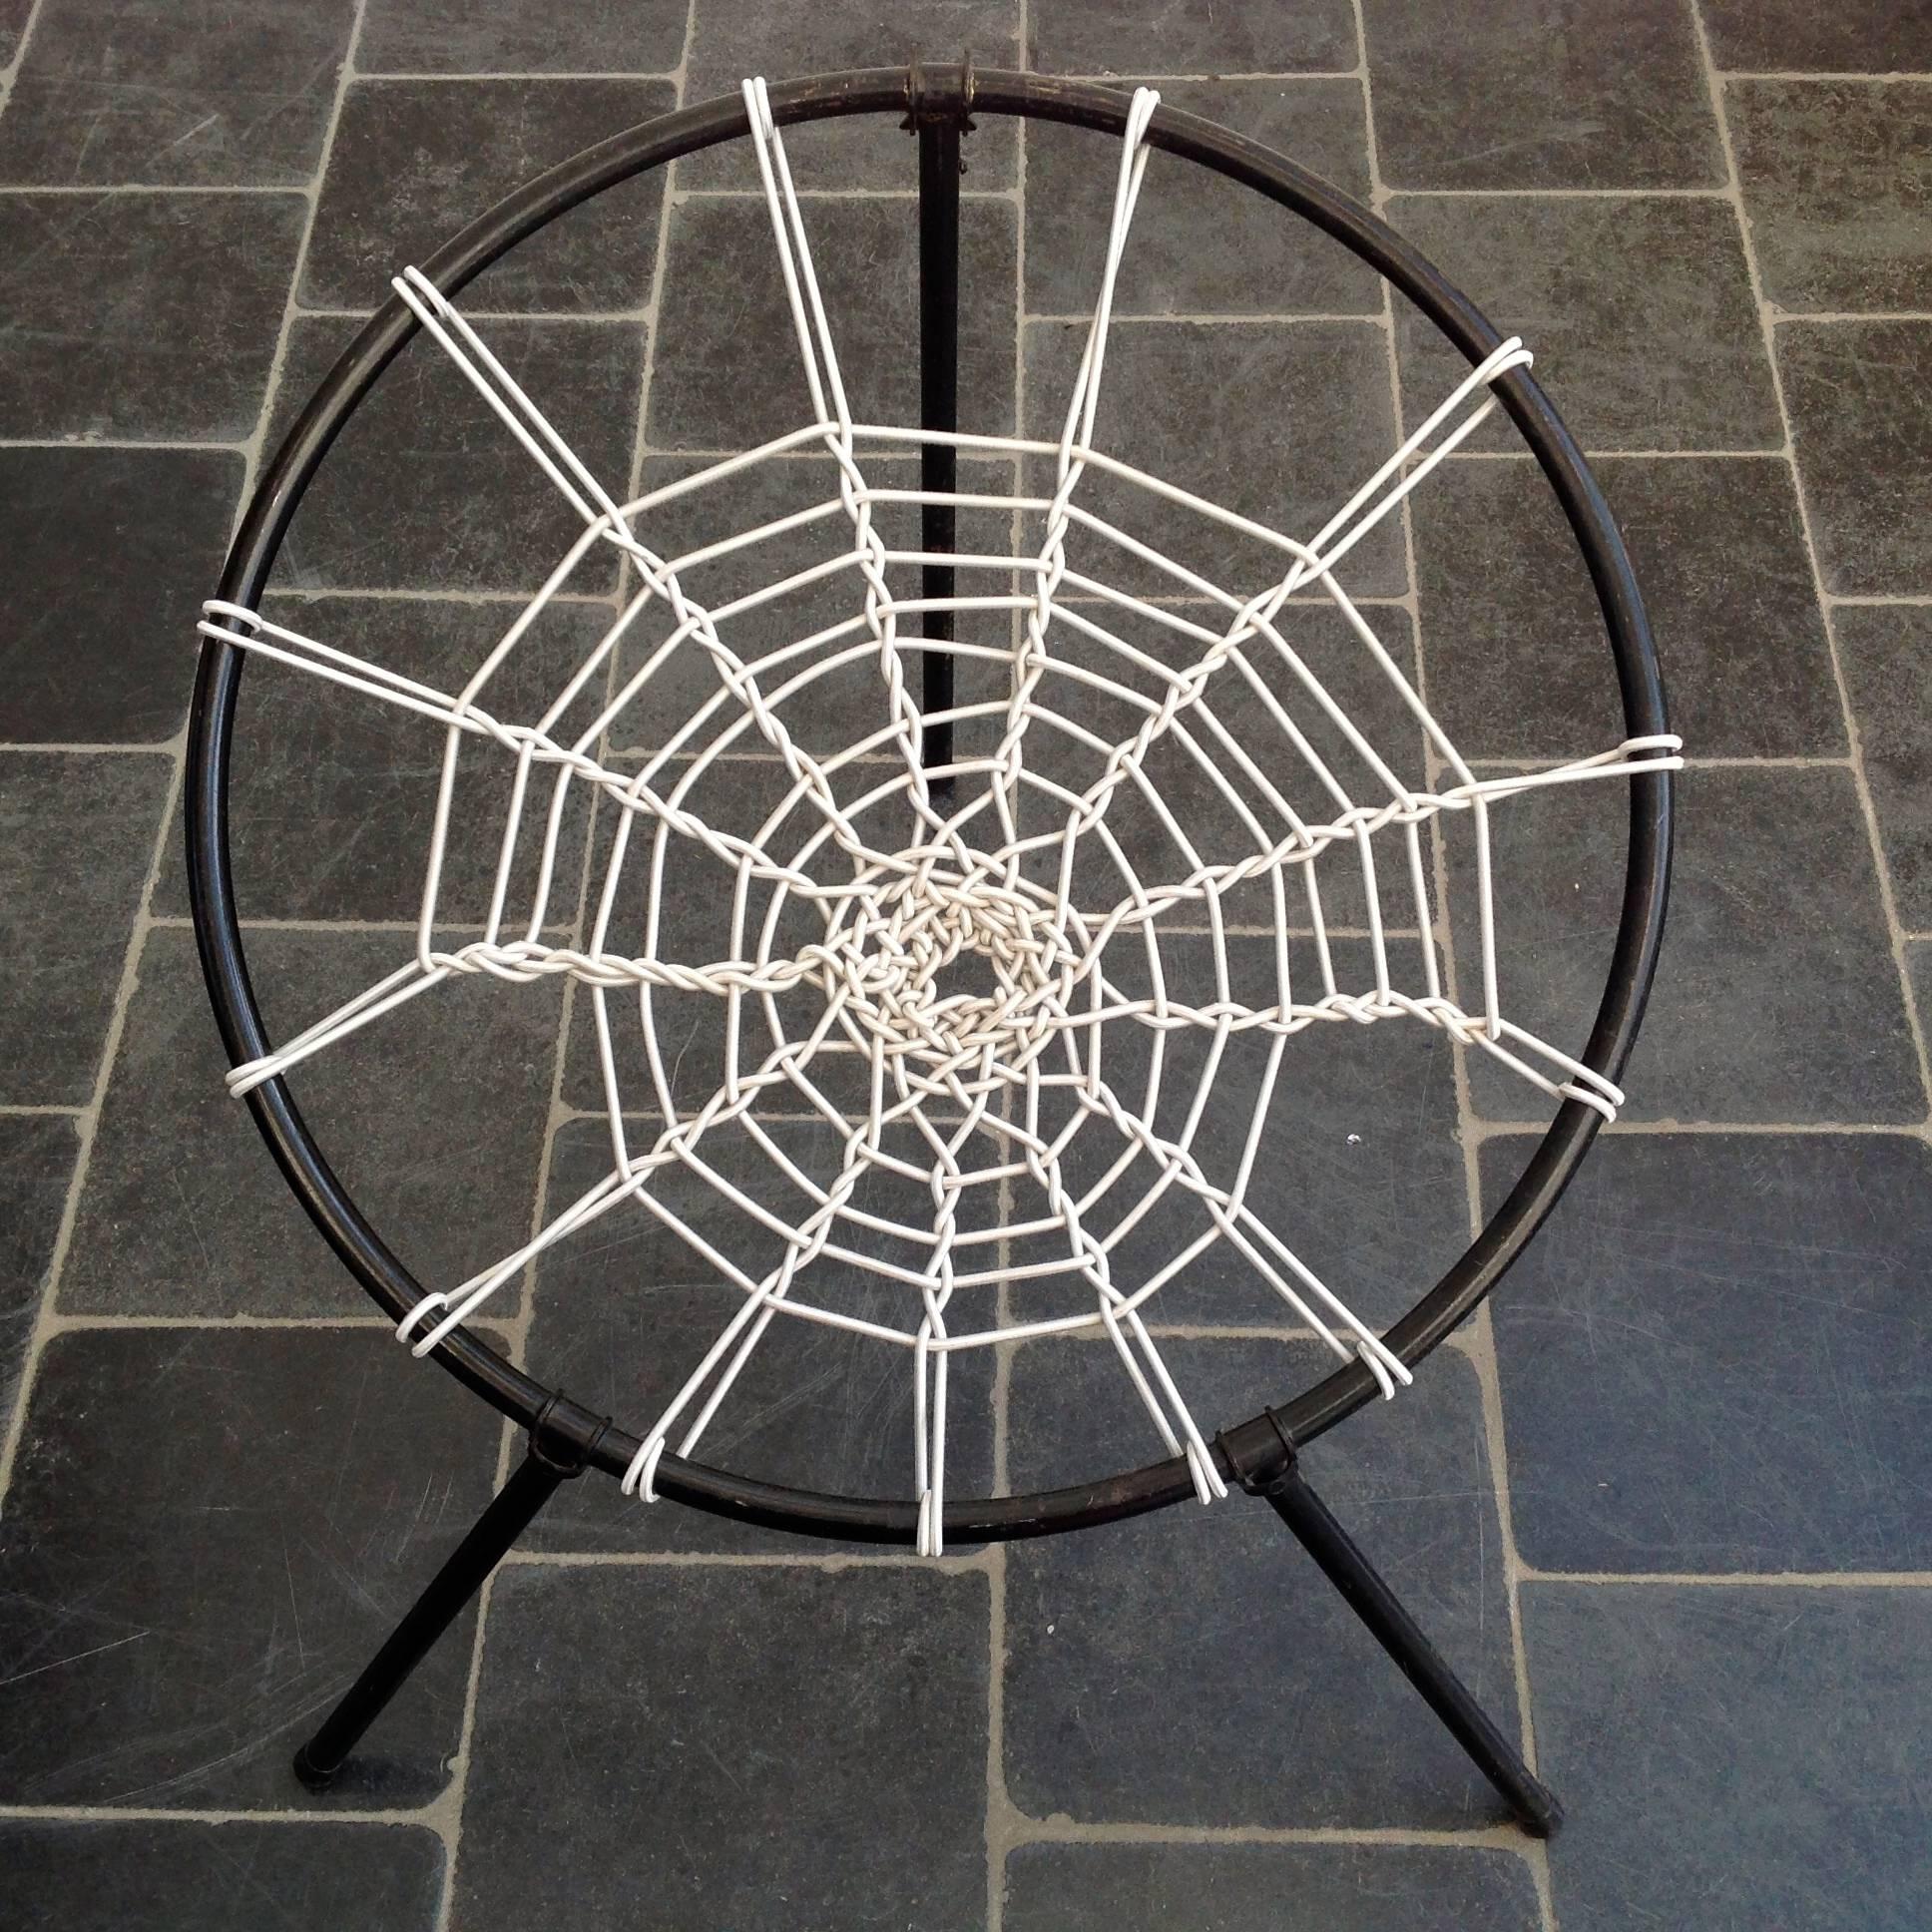 Rare and unusual spider web patio chairs by Hoffer of France.
Unique tubular steel collapsible frames with a elastic cord seat reminiscent of a spider web.
Other chairs maybe you will find are unusable, these are redone with exact the same new